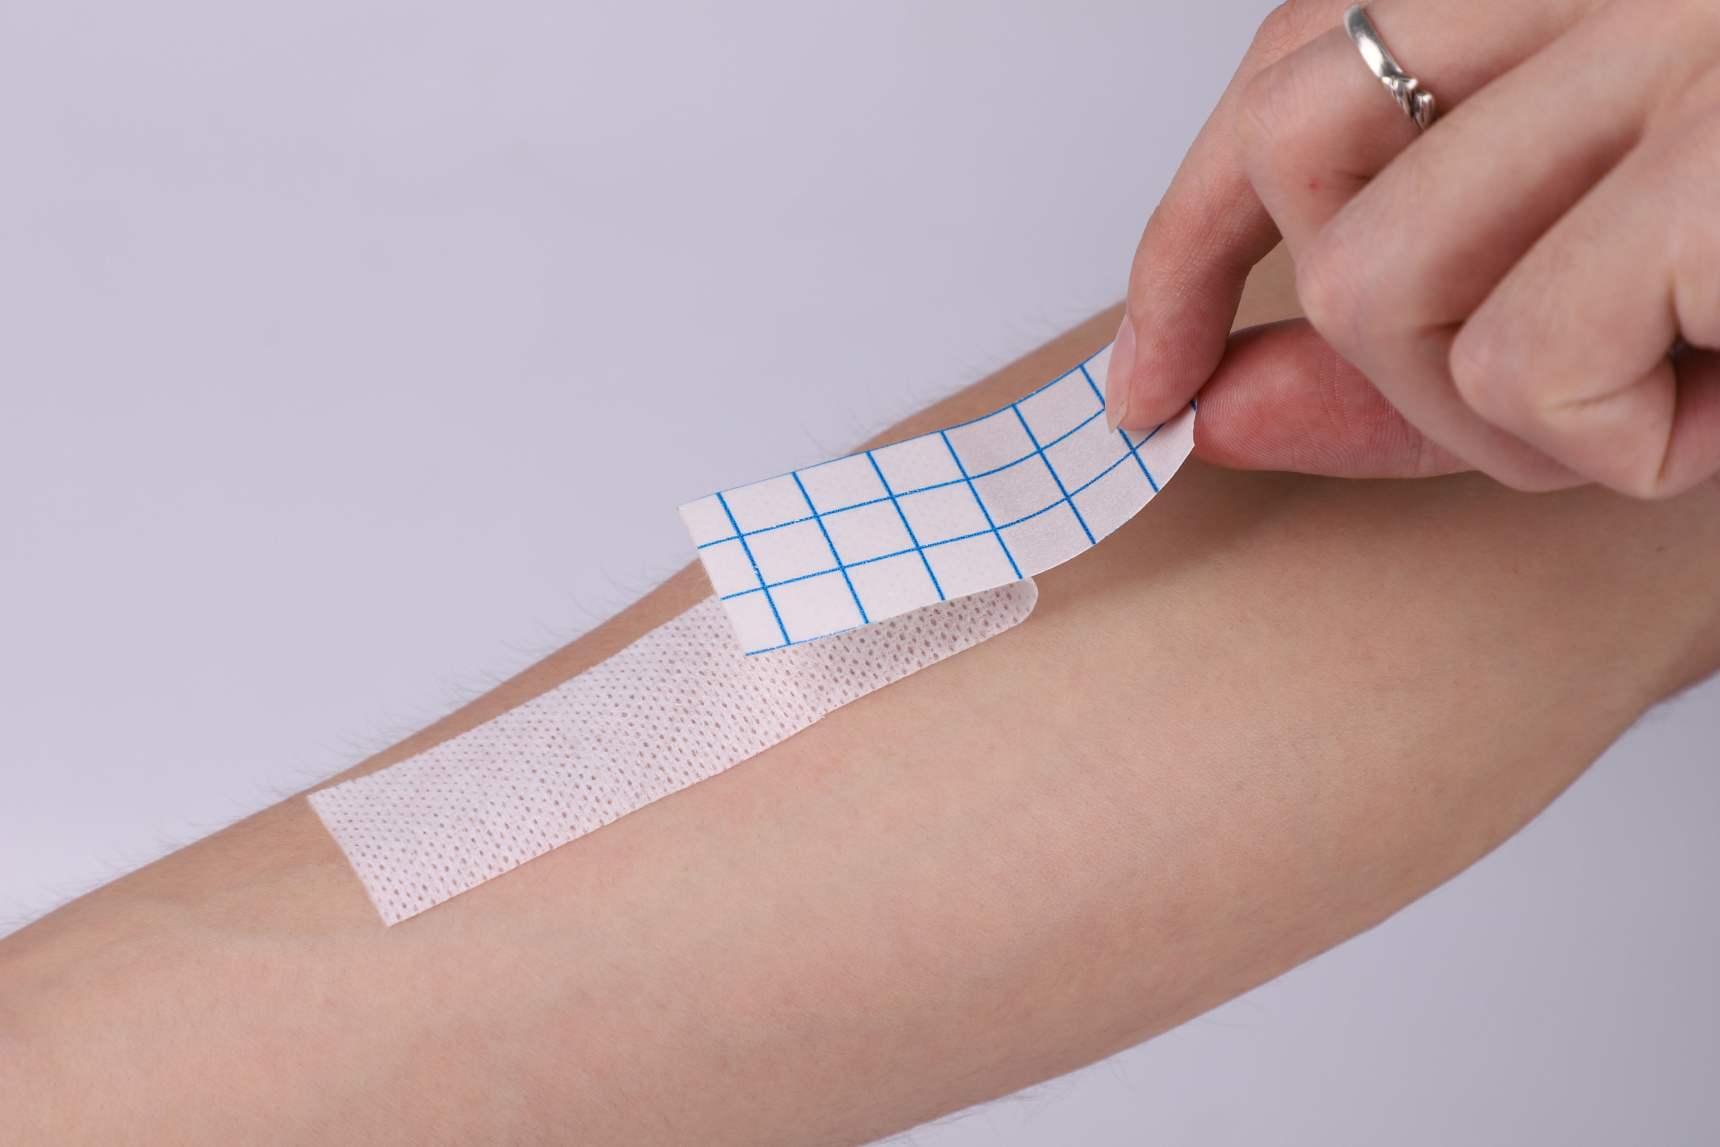 Surgical Adhesive Non-Woven Retention Tape Skin Color Medical Wound Dressing Care Family First Aid Kit